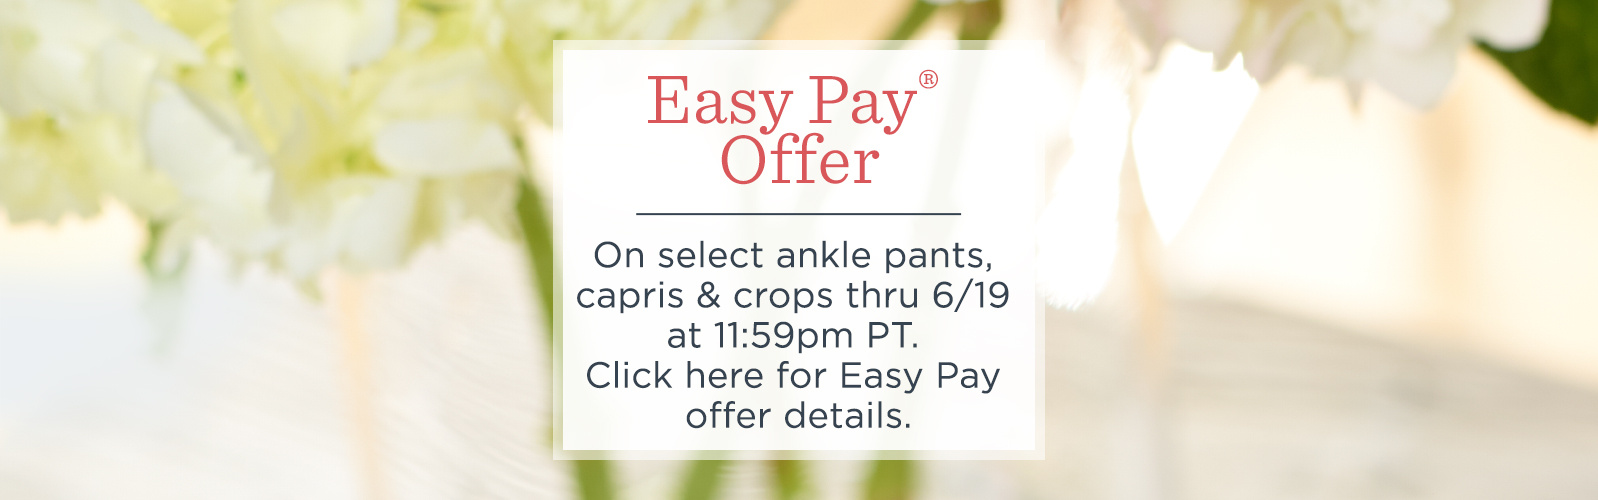 Easy Pay® Offer — On select ankle pants, capris & crops thru 6/19 at 11:59pm PT.  Click here for Easy Pay offer details.